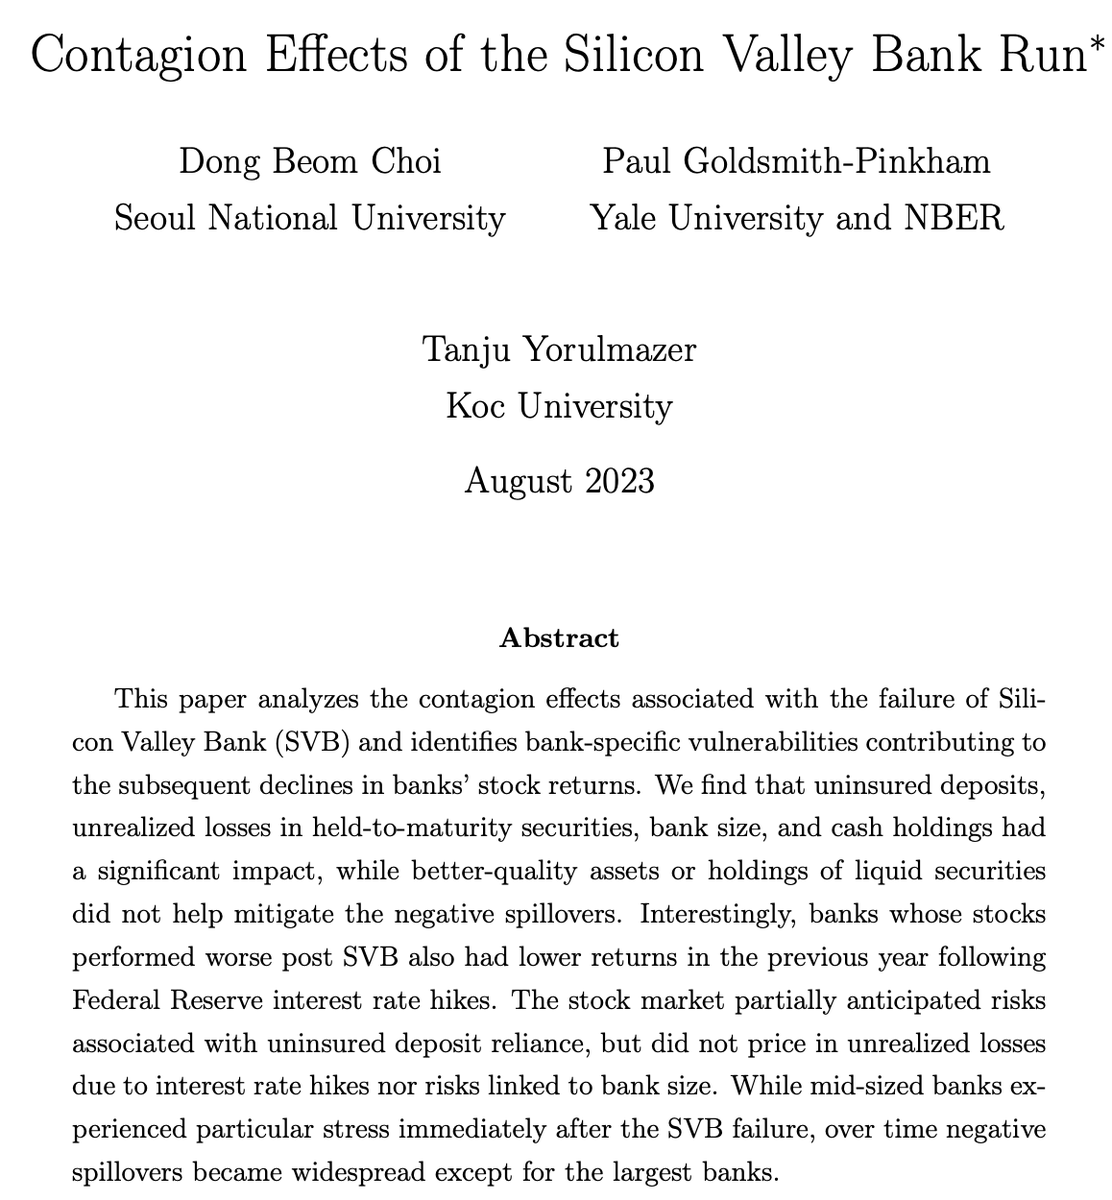 We're hopeful that this paper can be a useful documentation of the SVB bank run that can inform research and policy work going forward! Working Paper here: arxiv.org/abs/2308.06642 Data and code here: github.com/paulgp/bank_re… Comments and suggestions very welcome!